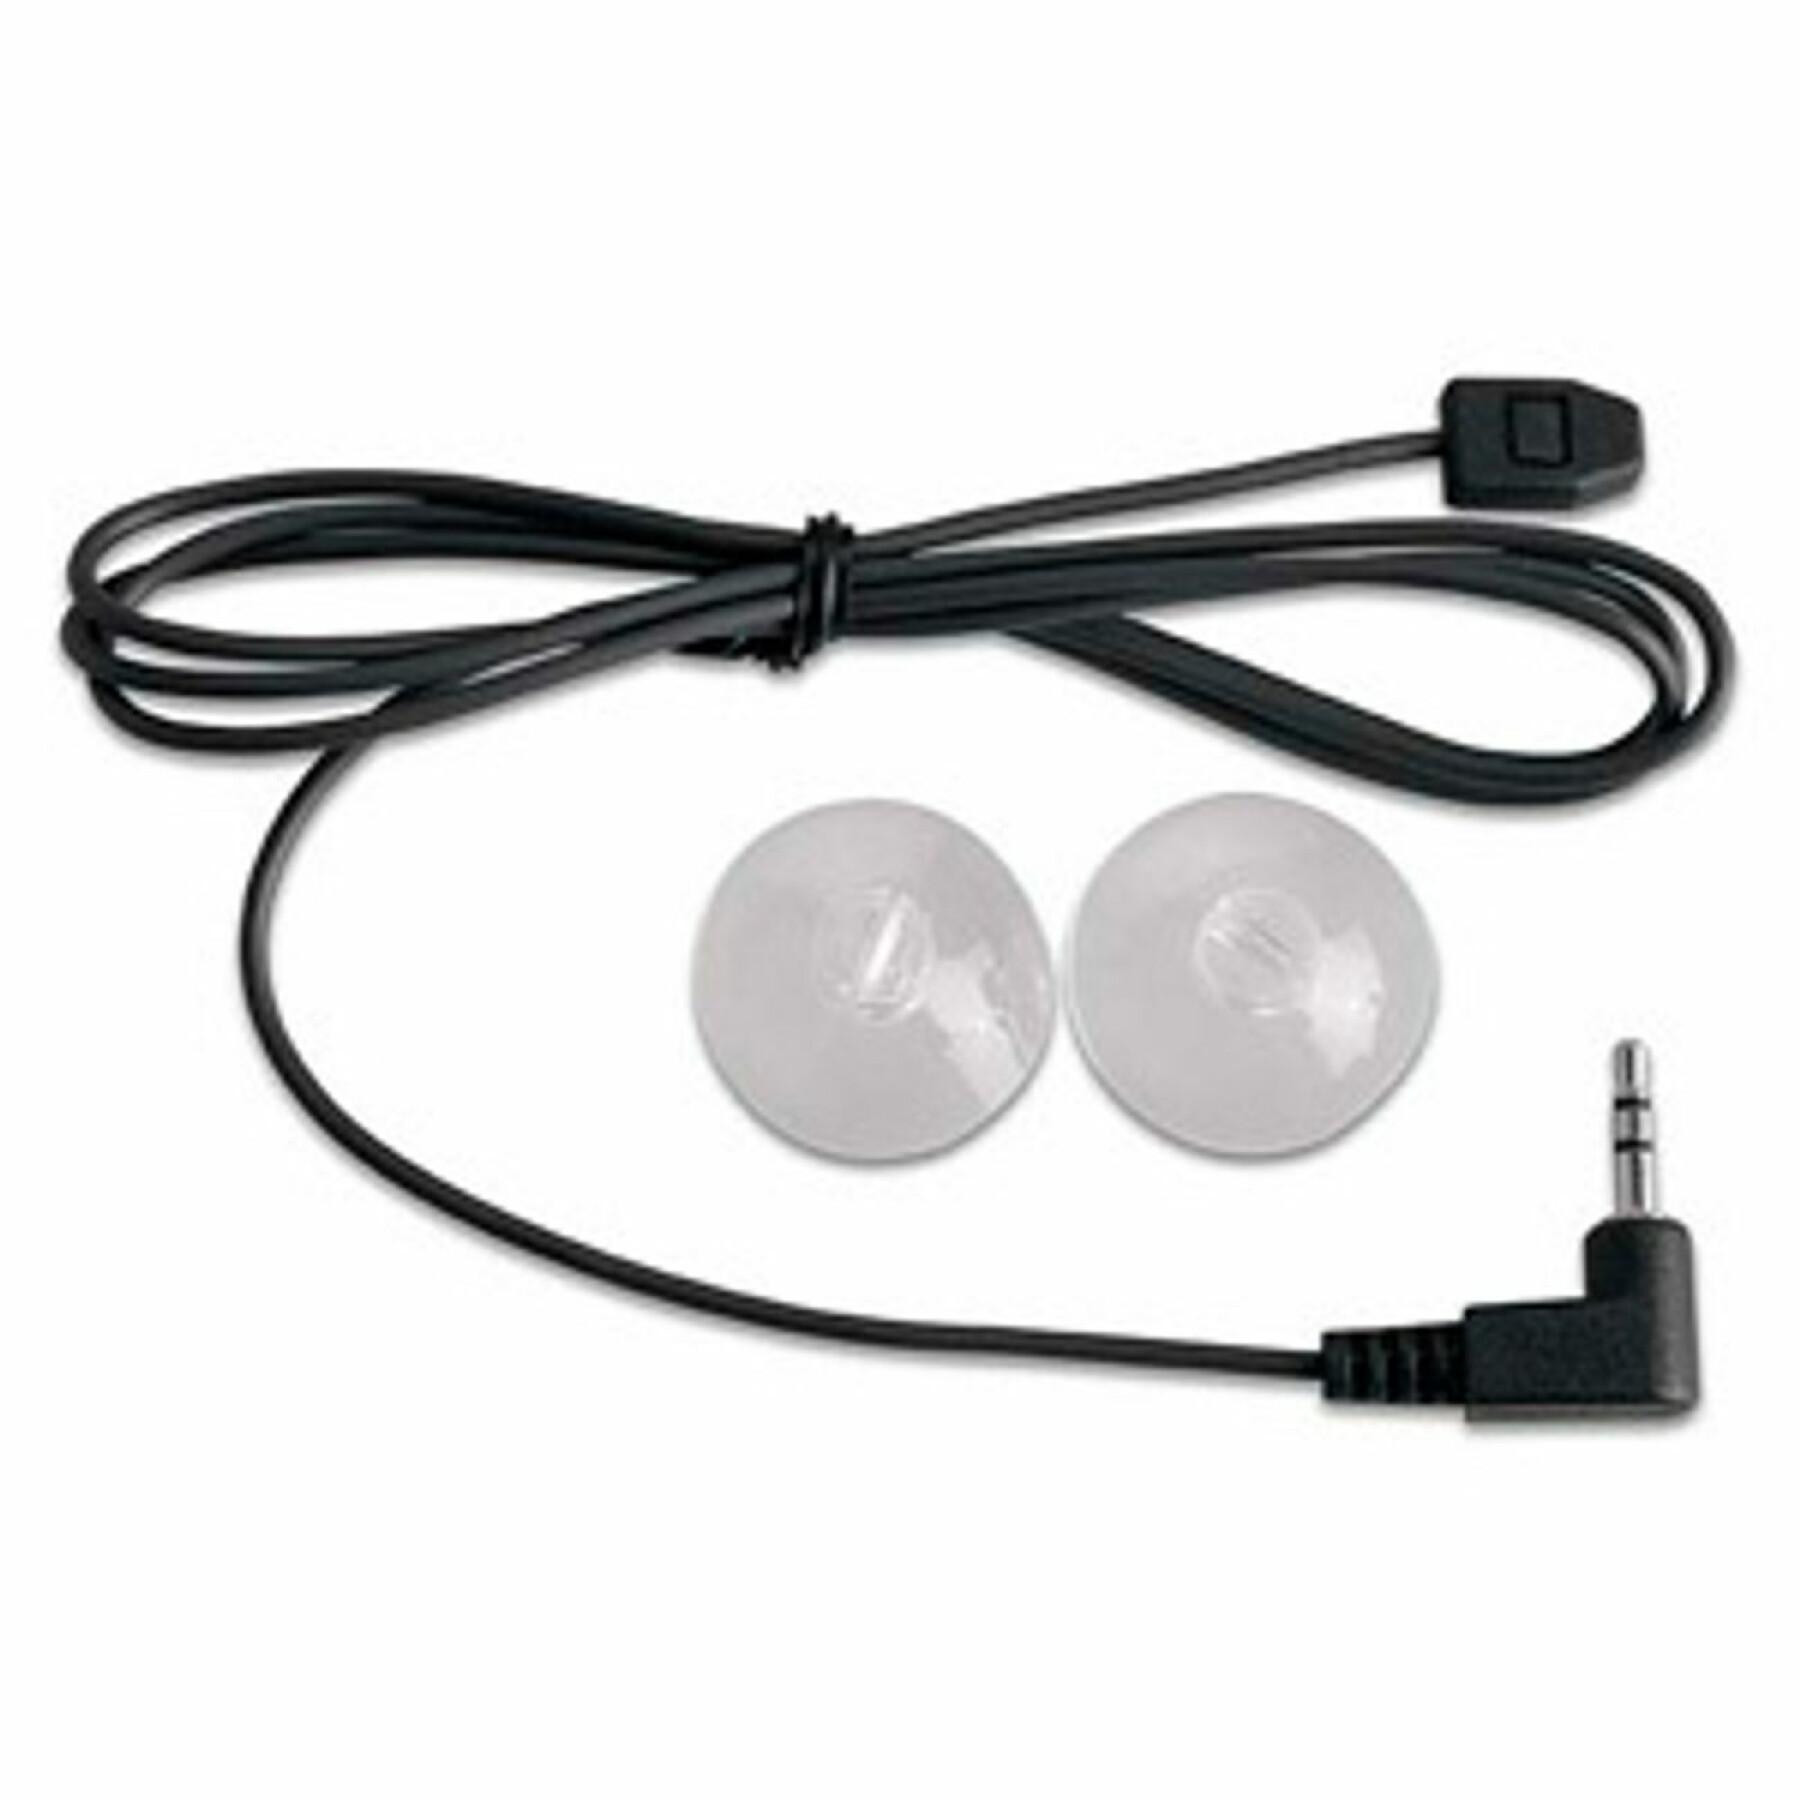 Antenne Garmin extension cable with suction cups